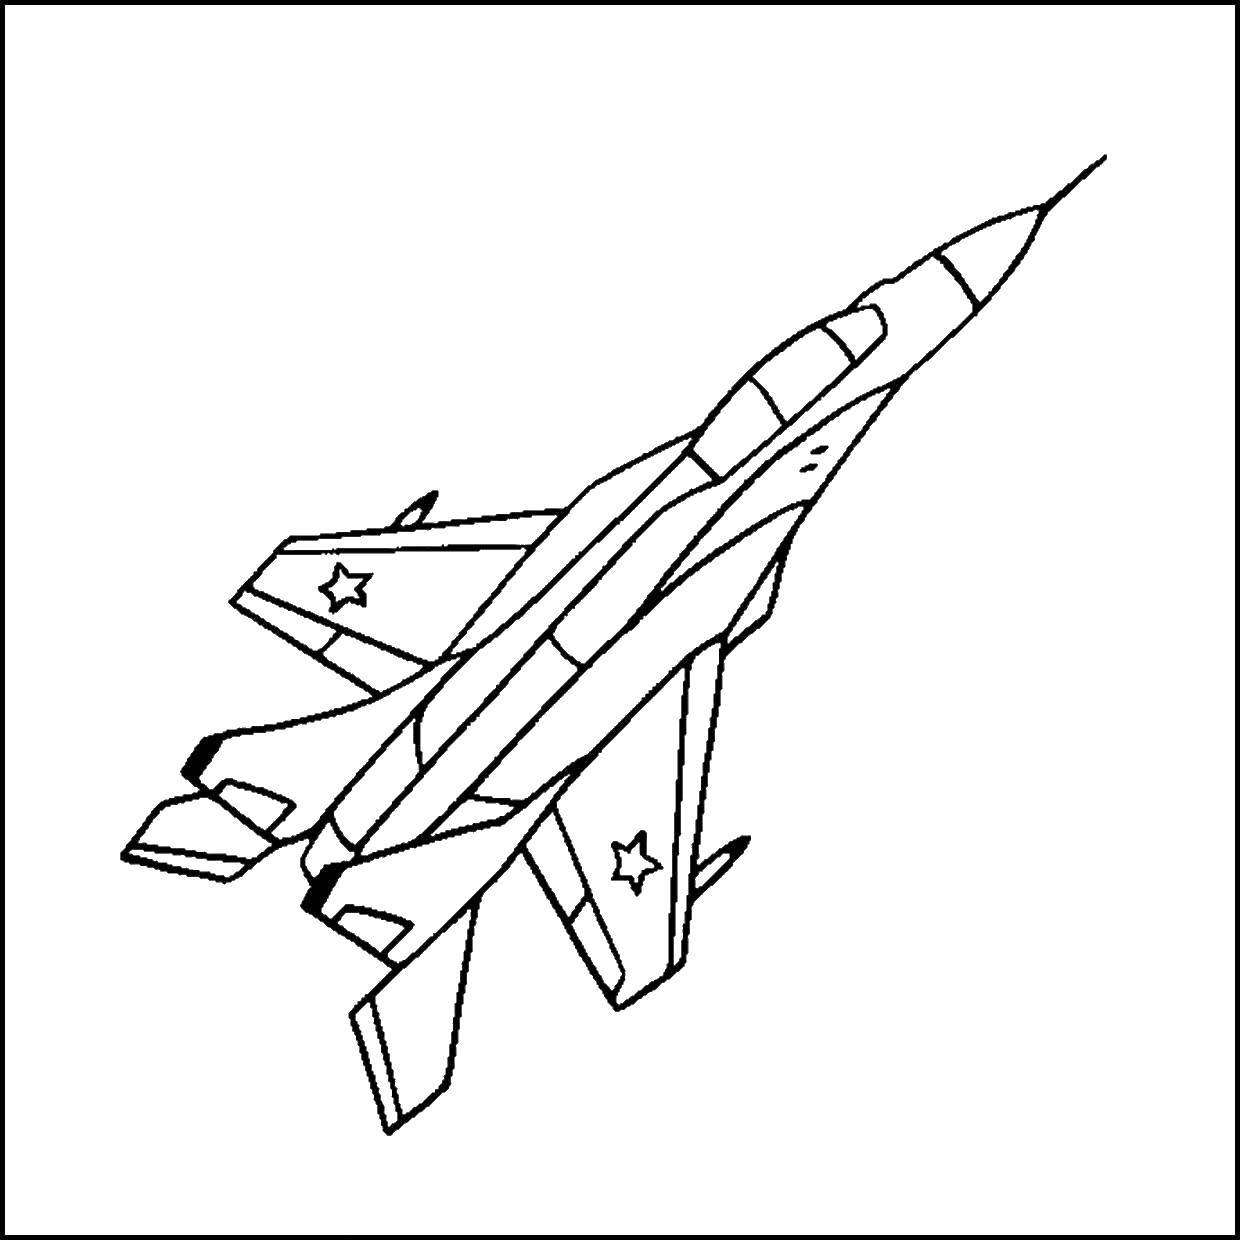 Coloring Military aircraft. Category the planes. Tags:  transportation, military, plane.